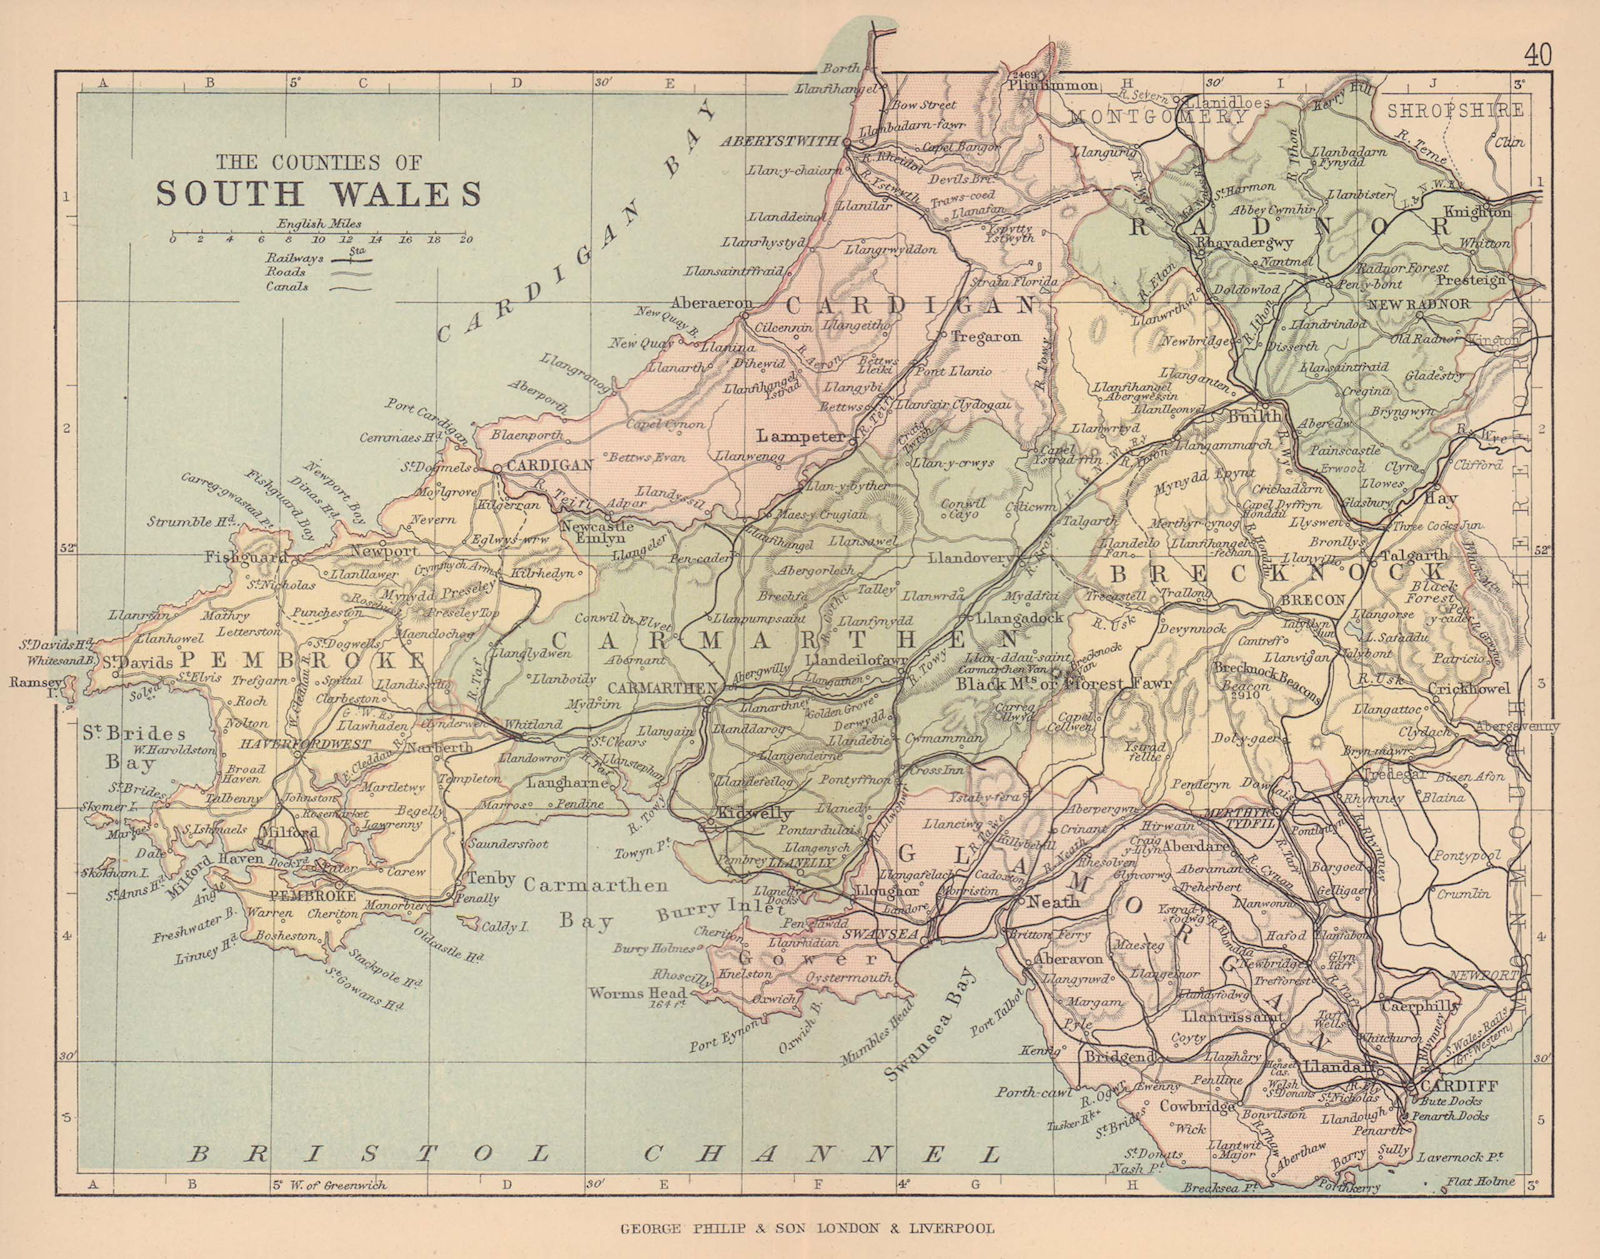 SOUTH WALES. Antique map. Counties Railways roads canals. PHILIP 1885 old